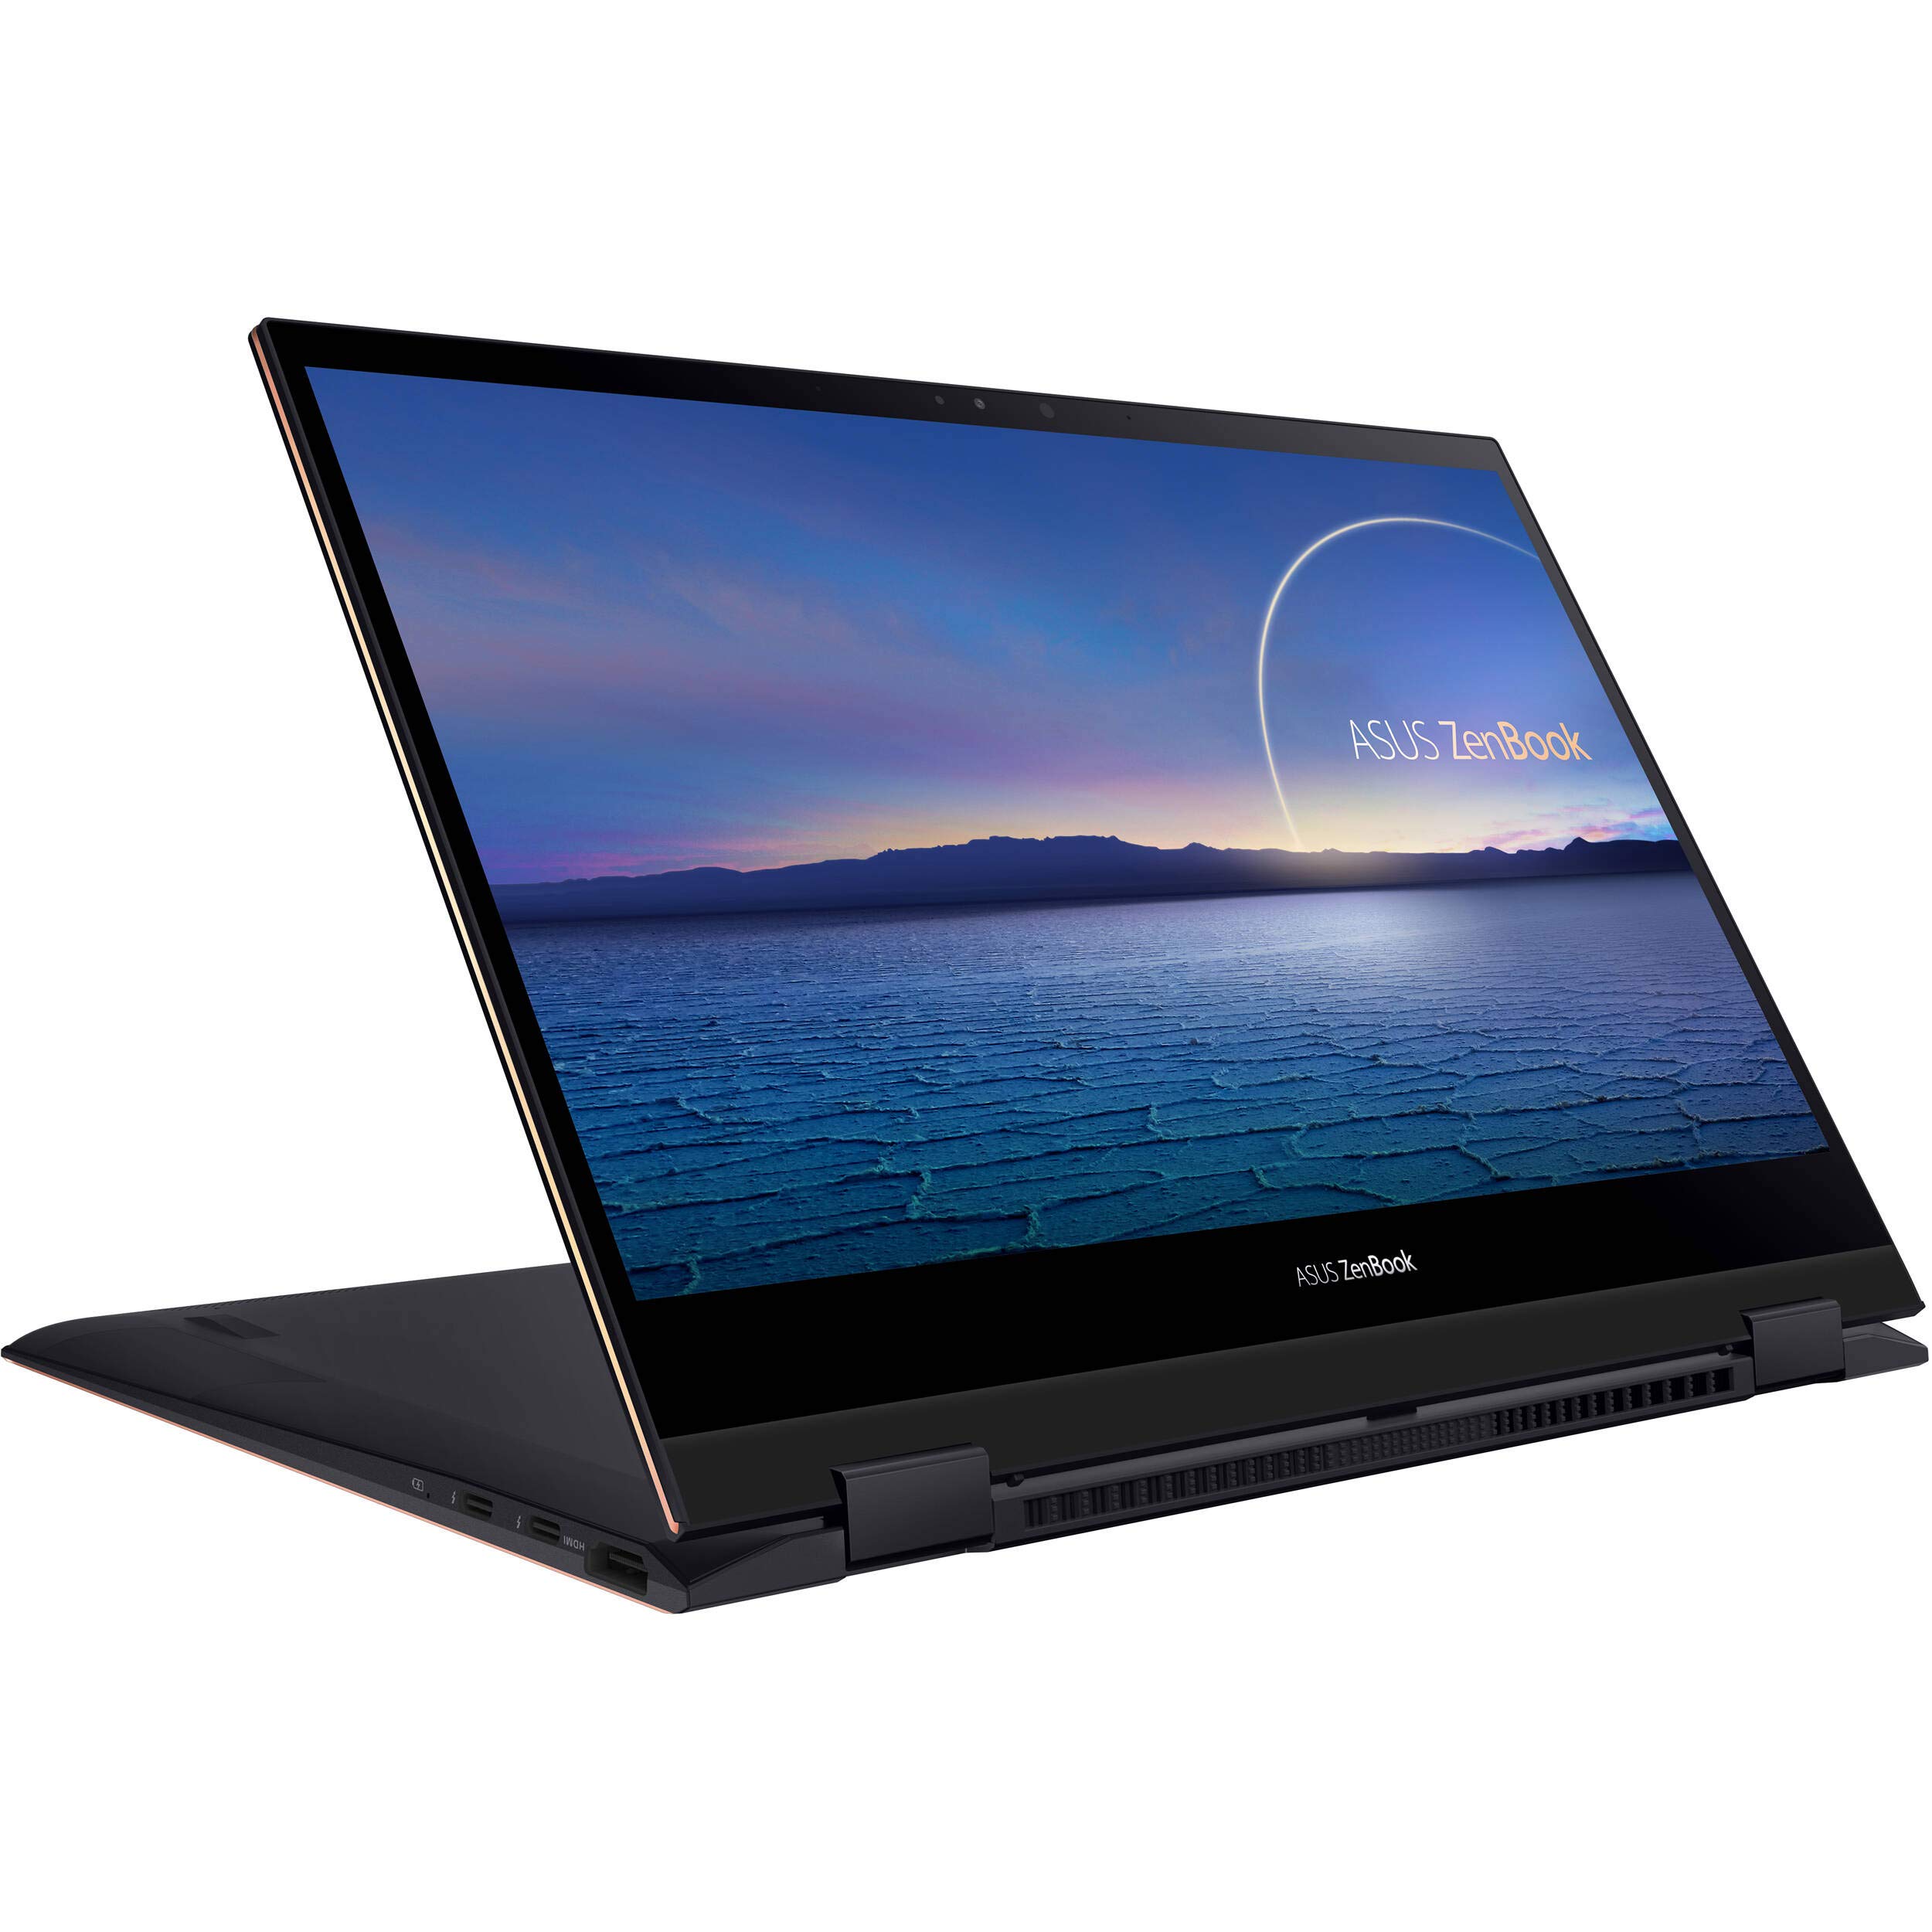 New ZenBook Flip S Ultra Slim Laptop UX371EA-XH77T 13.3 inches 4K OLED Touch Display 11TH Gen i7-1165G7 Iris Xe Thunderbolt 4 Windows Hello Active Pen, Best Notebooks Stylus Pen (2TB SSD|16GB Ram|10 Pro), 13-13.99 inches